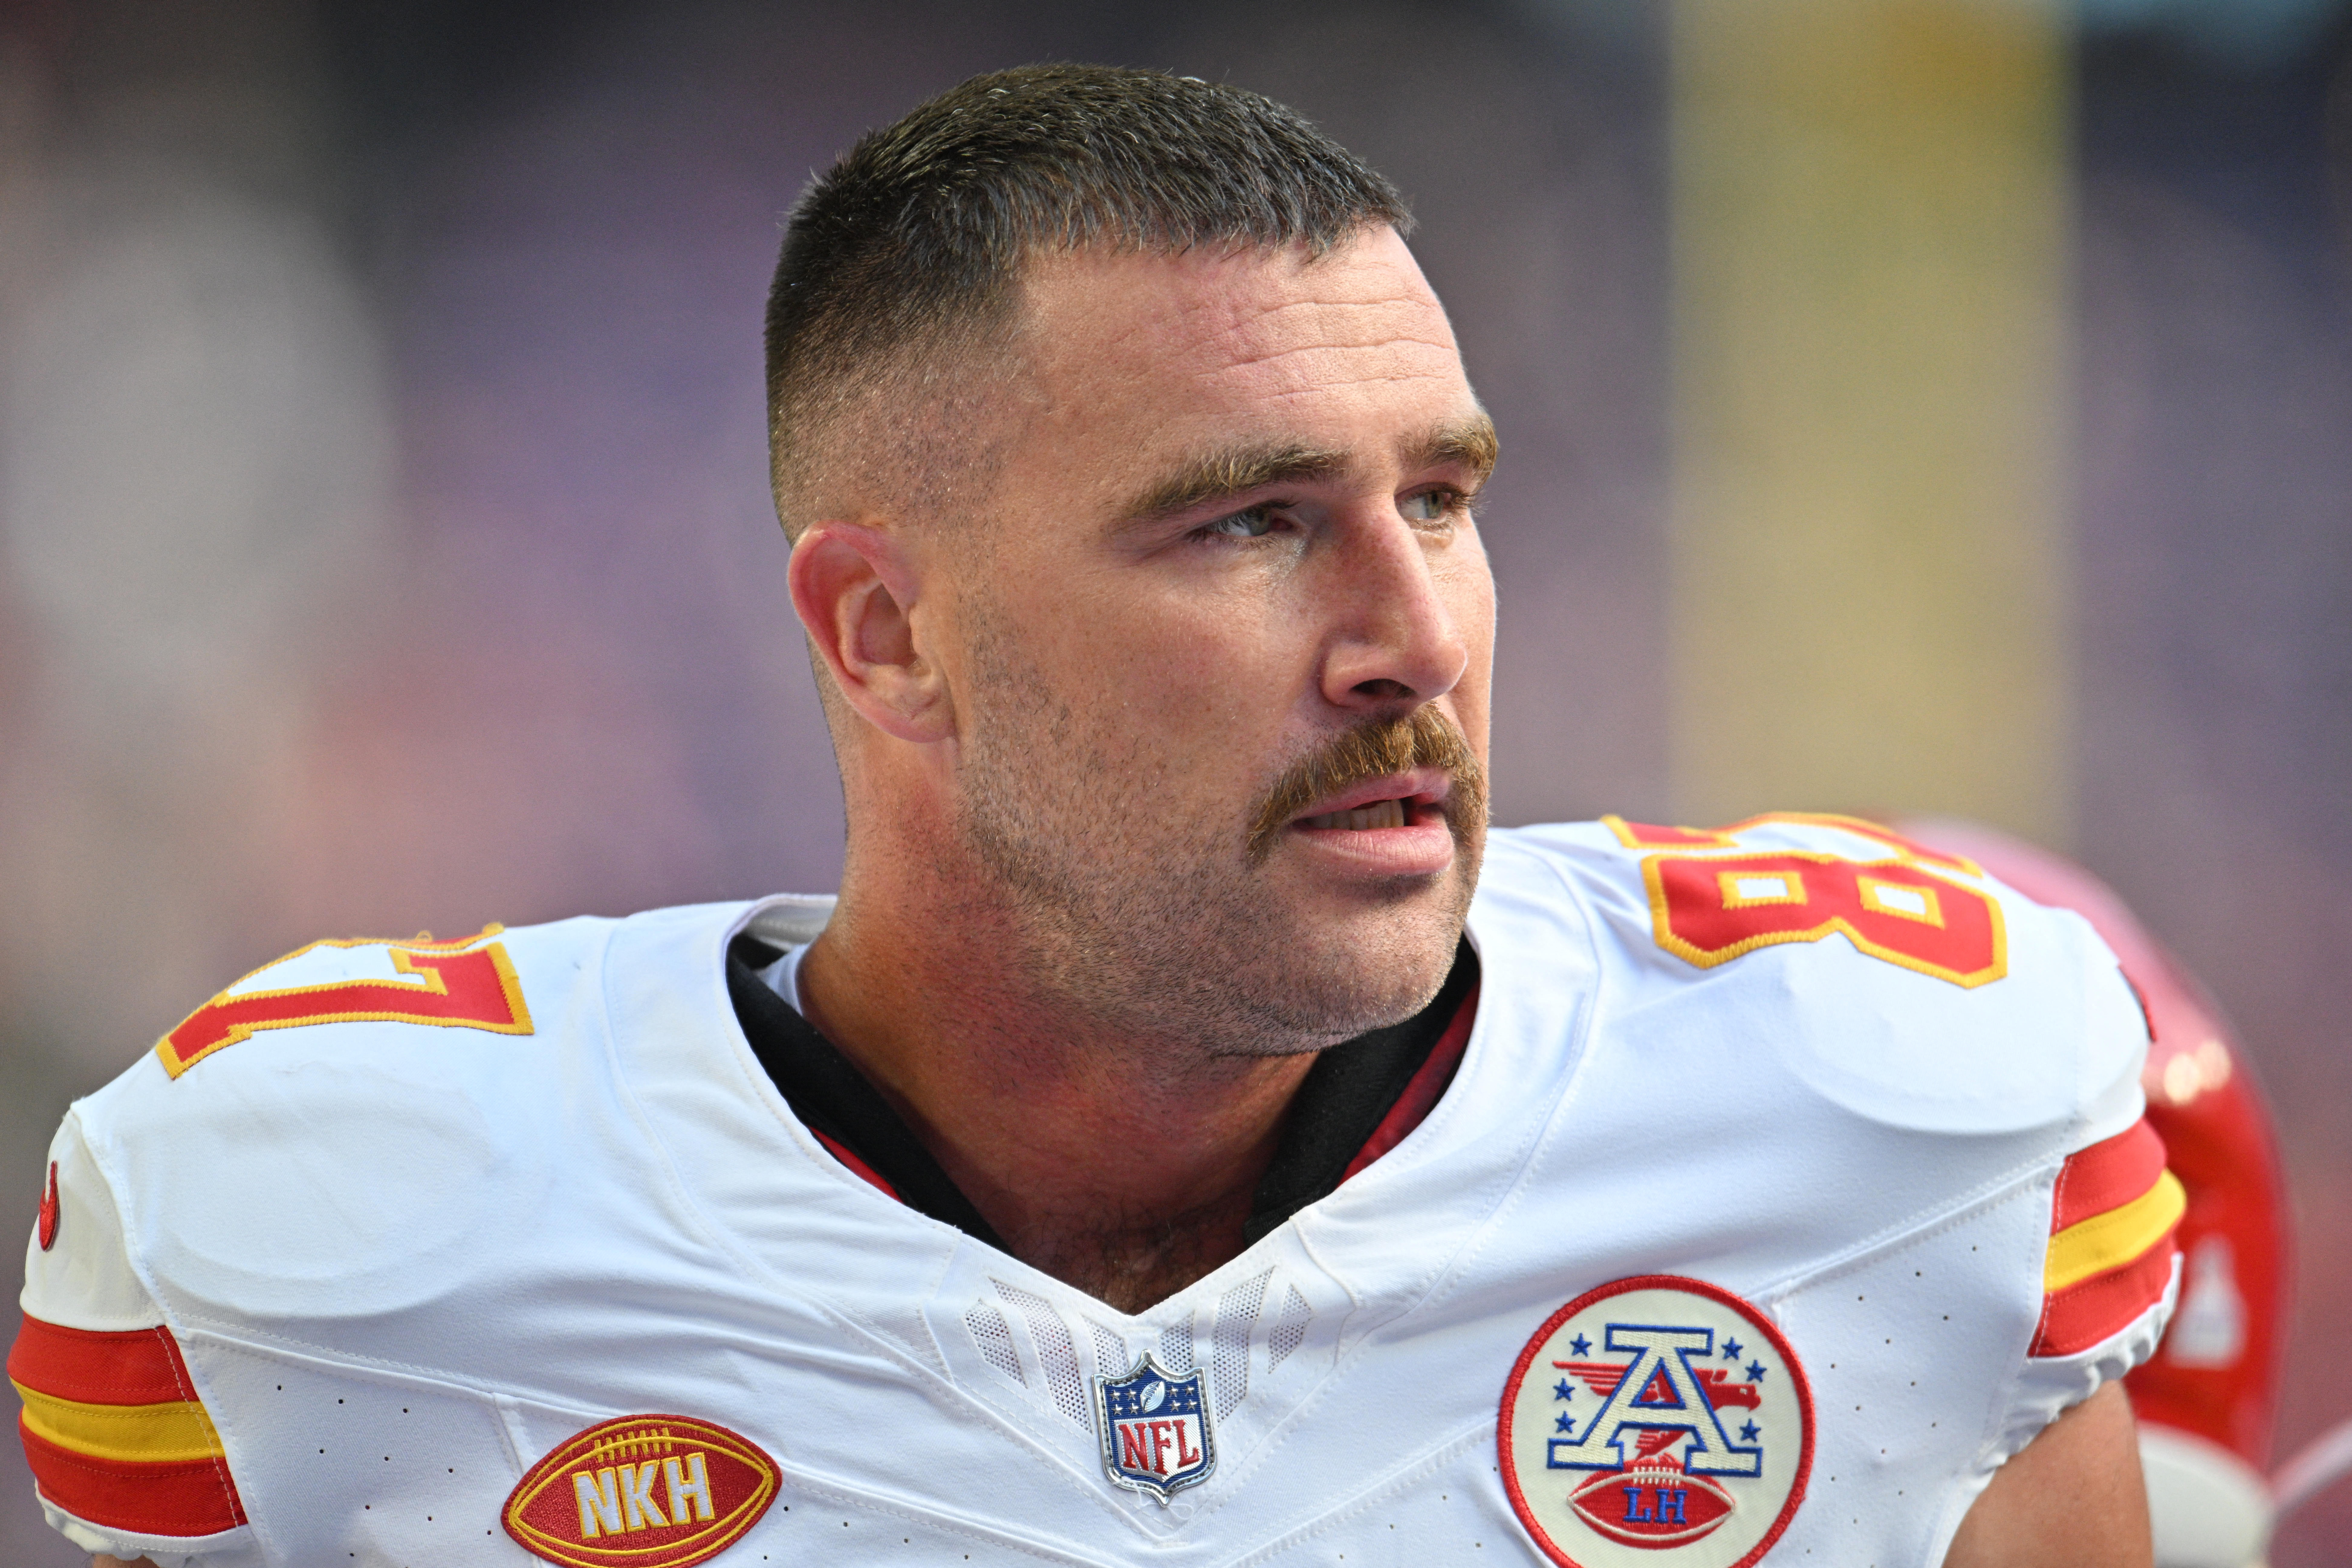 Chiefs tight end Travis Kelce to launch new lifestyle brand